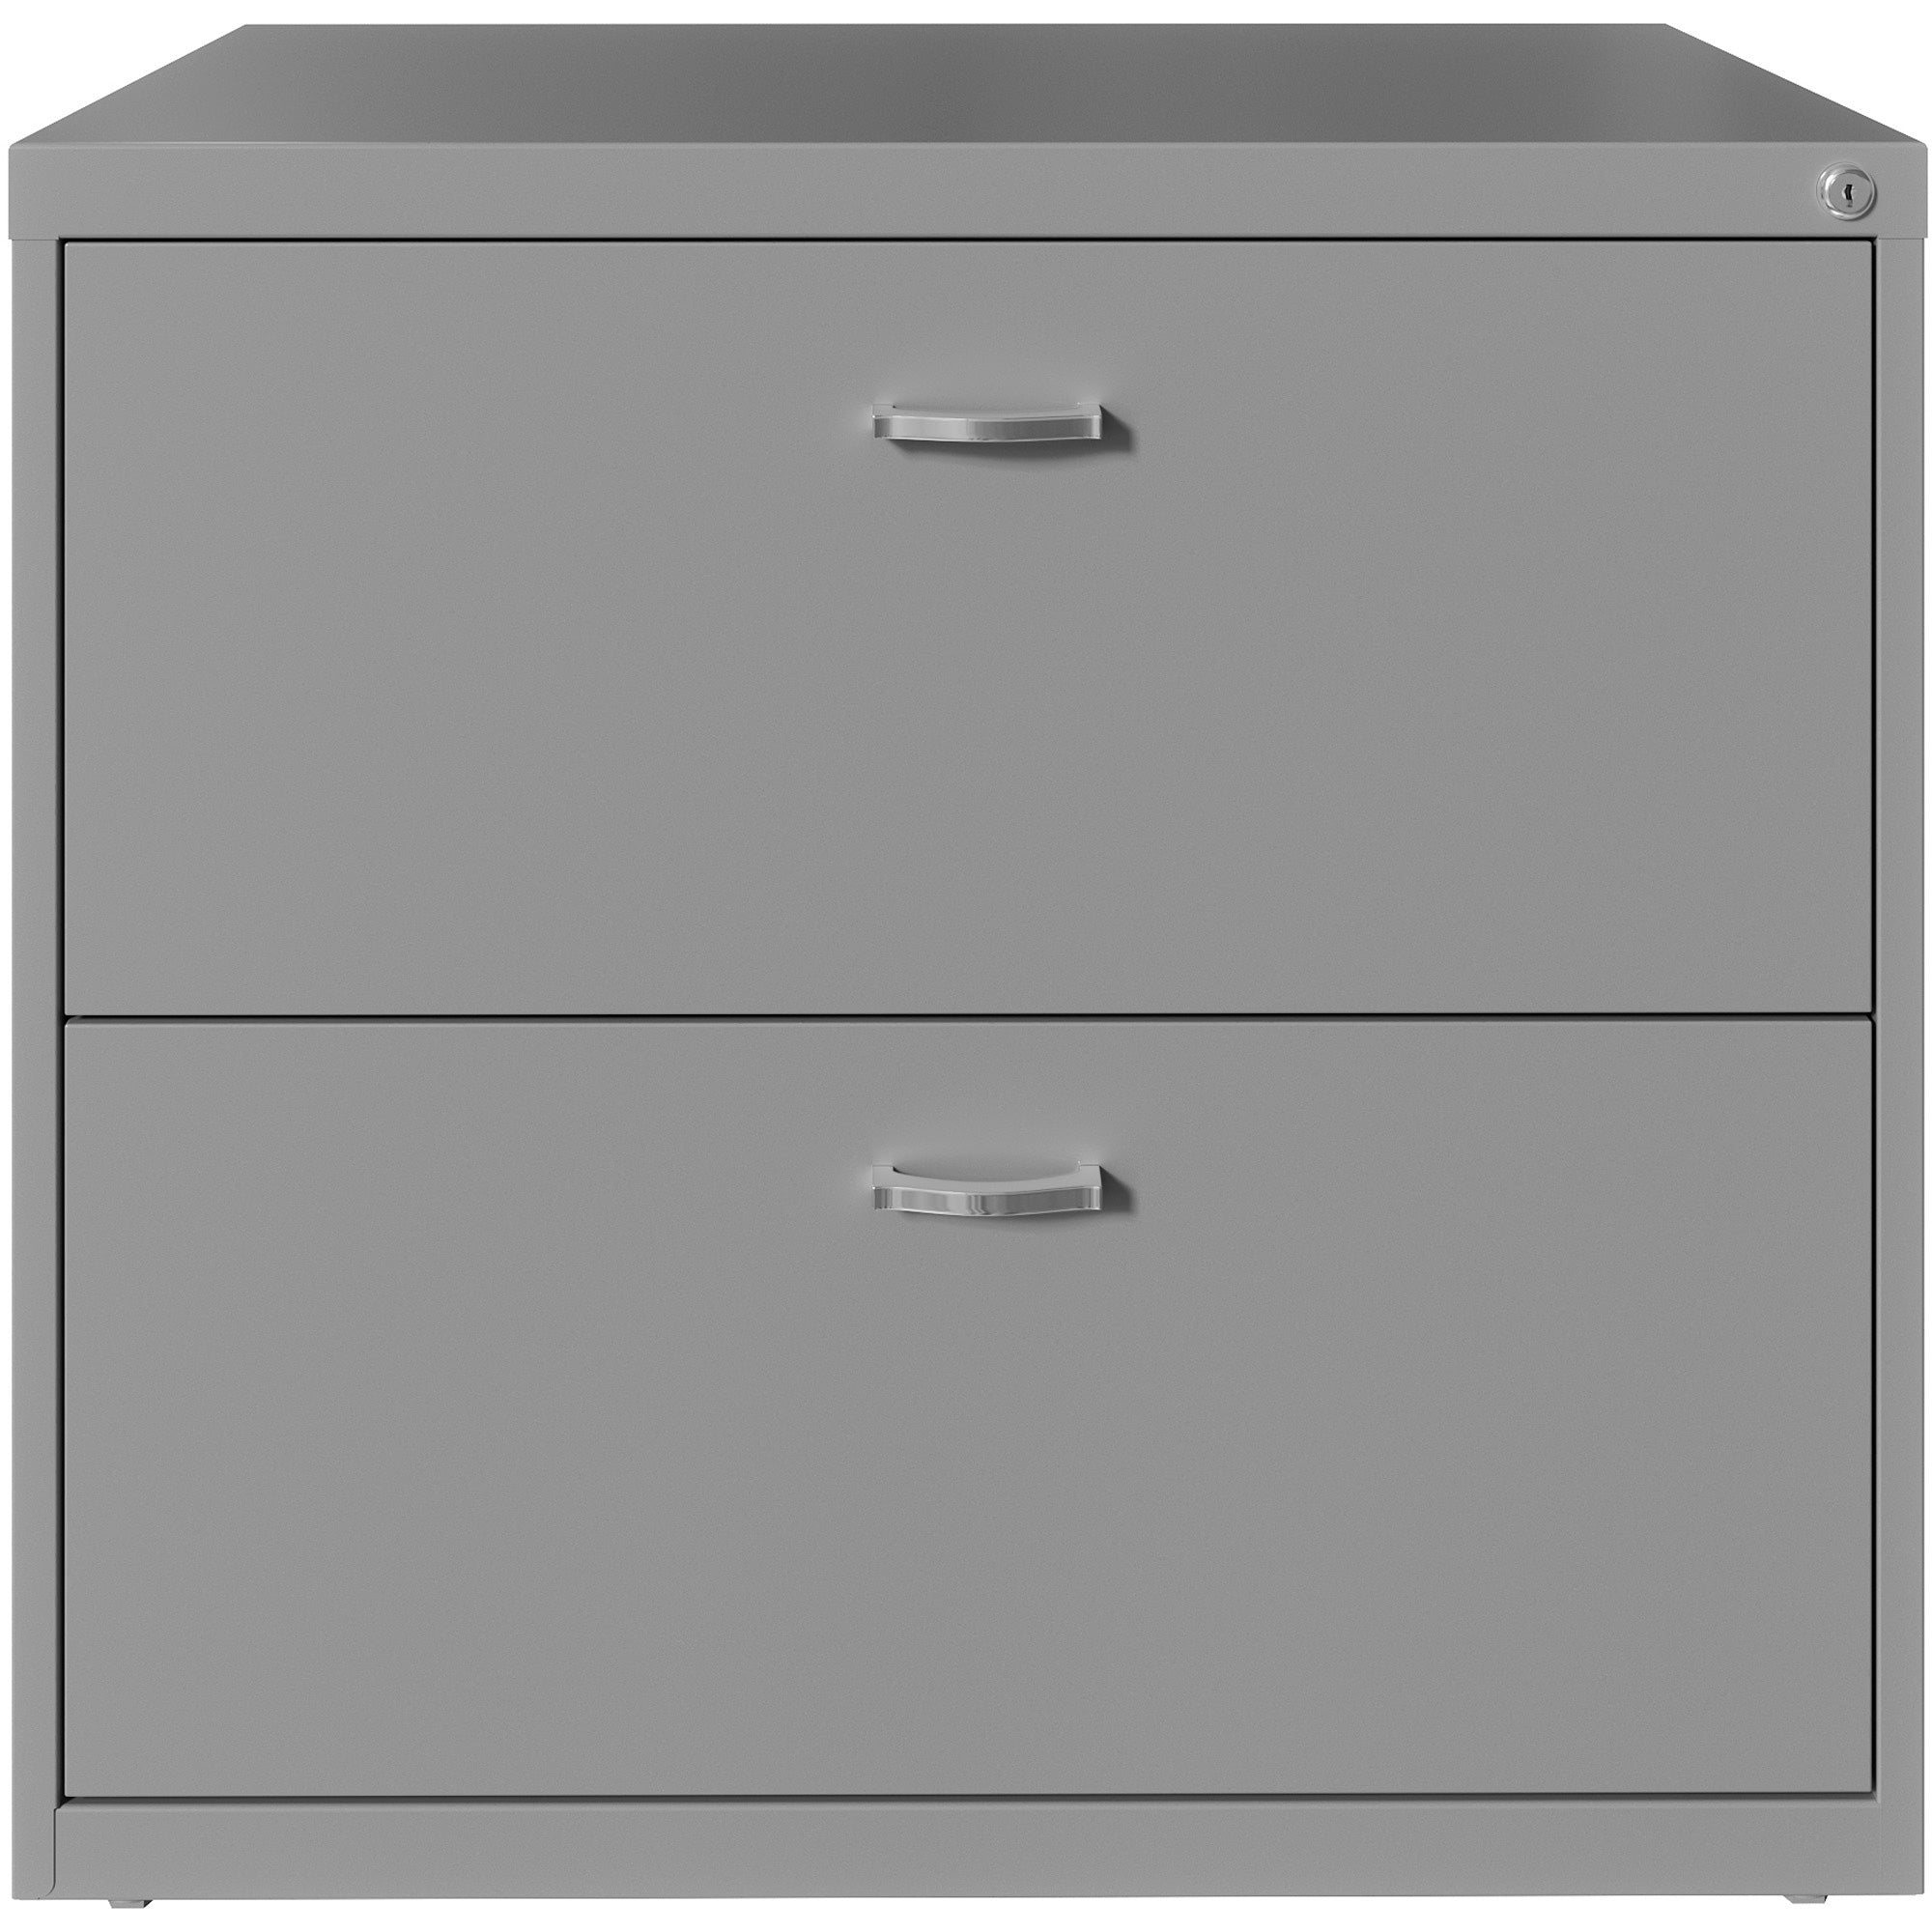 nusparc-2-drawer-lateral-file-30-x-176-x-277-2-x-drawers-for-file-letter-lateral-interlocking-anti-tip-ball-bearing-slide-ball-bearing-suspension-removable-lock-leveling-glide-adjustable-glide-durable-nonporous-surface-gray_nprlf218aasr - 1